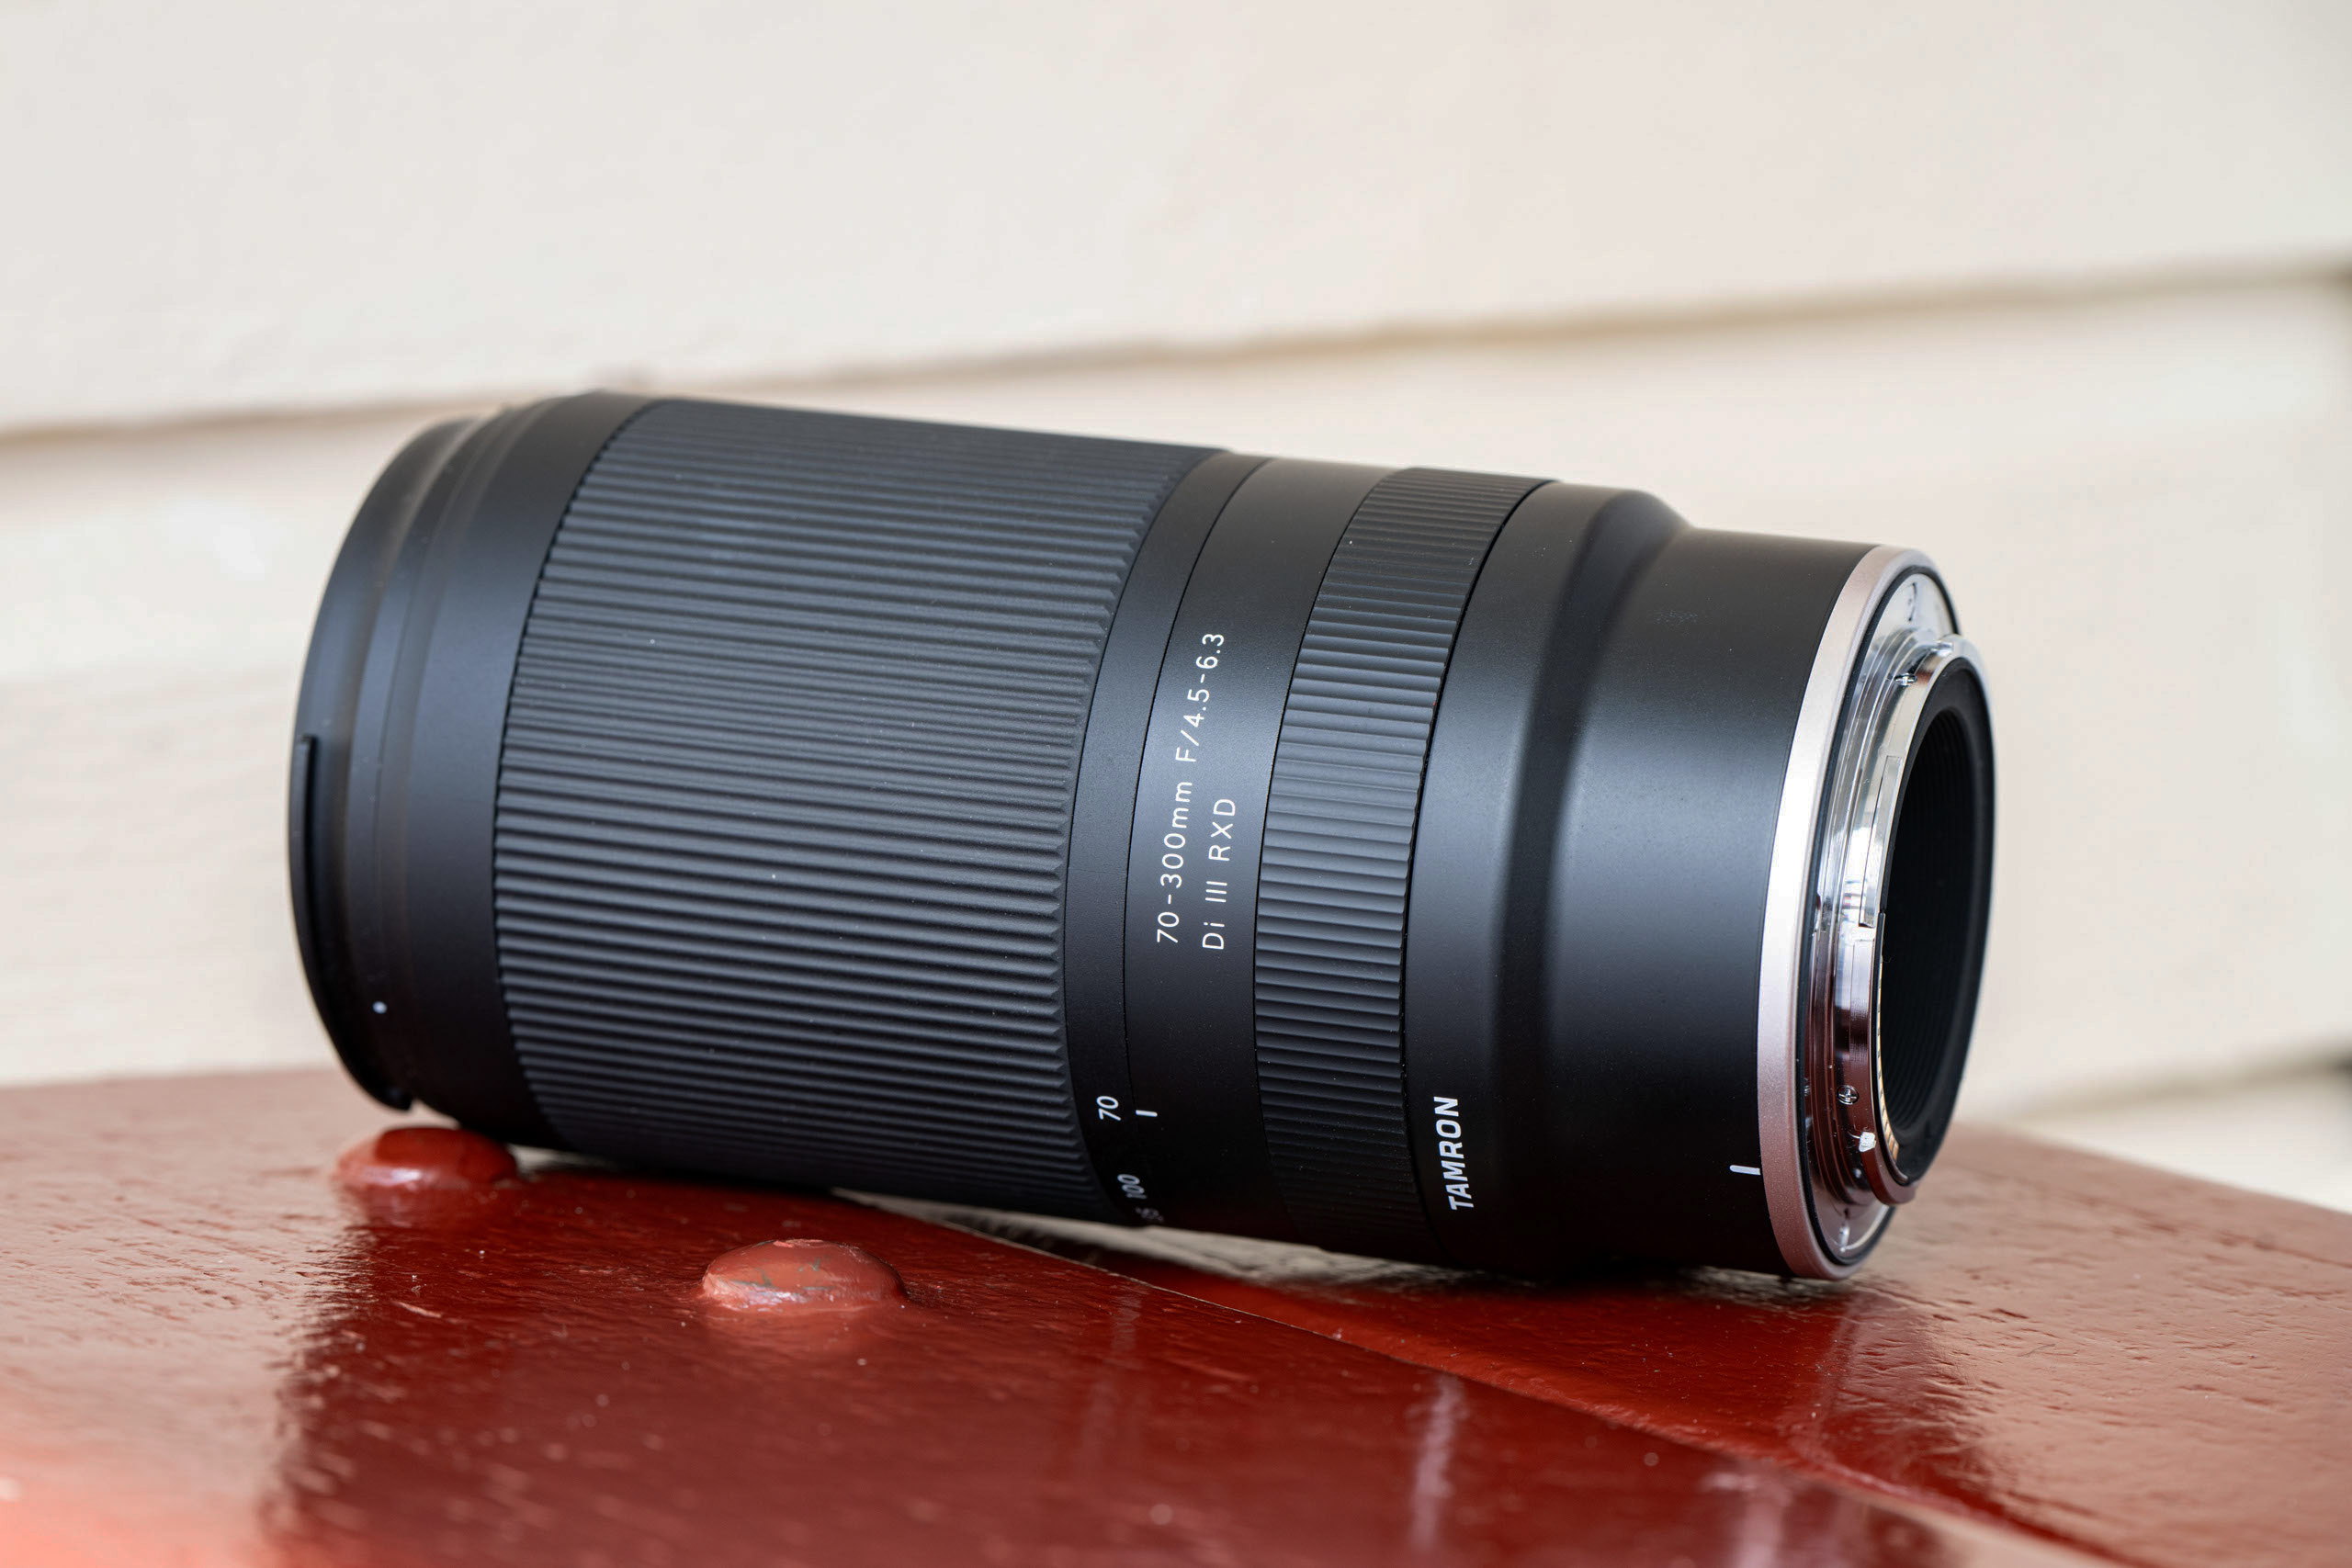 Tamron 70-300mm f/4.5-6.3 Di III RXD for Z mount - Amateur